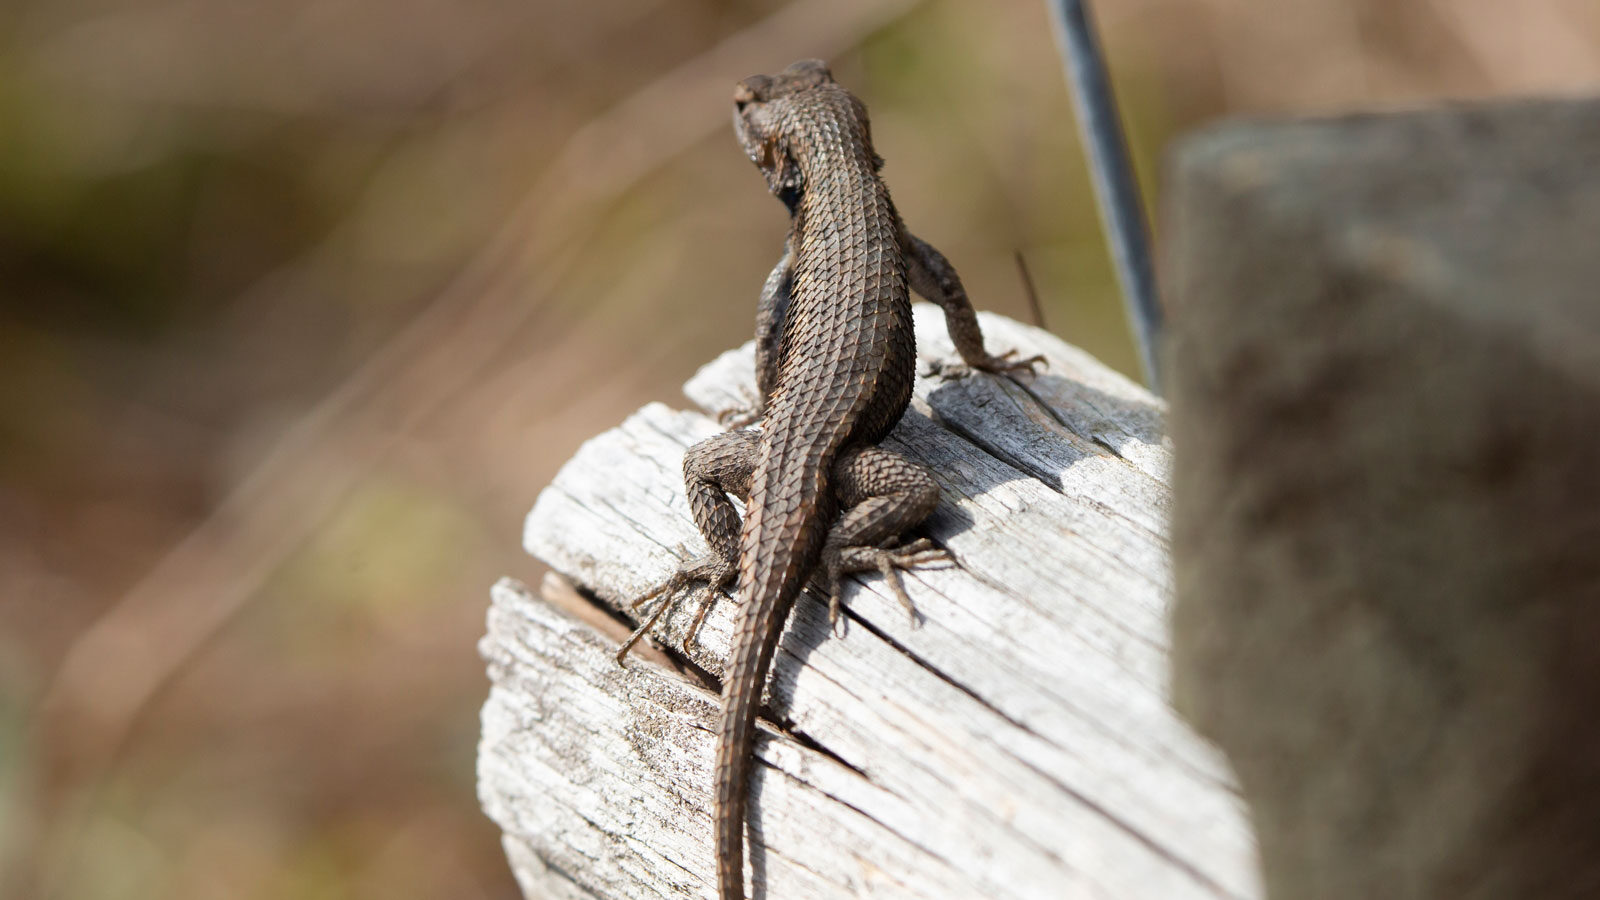 Eastern fence lizard looking around from its wooden perch